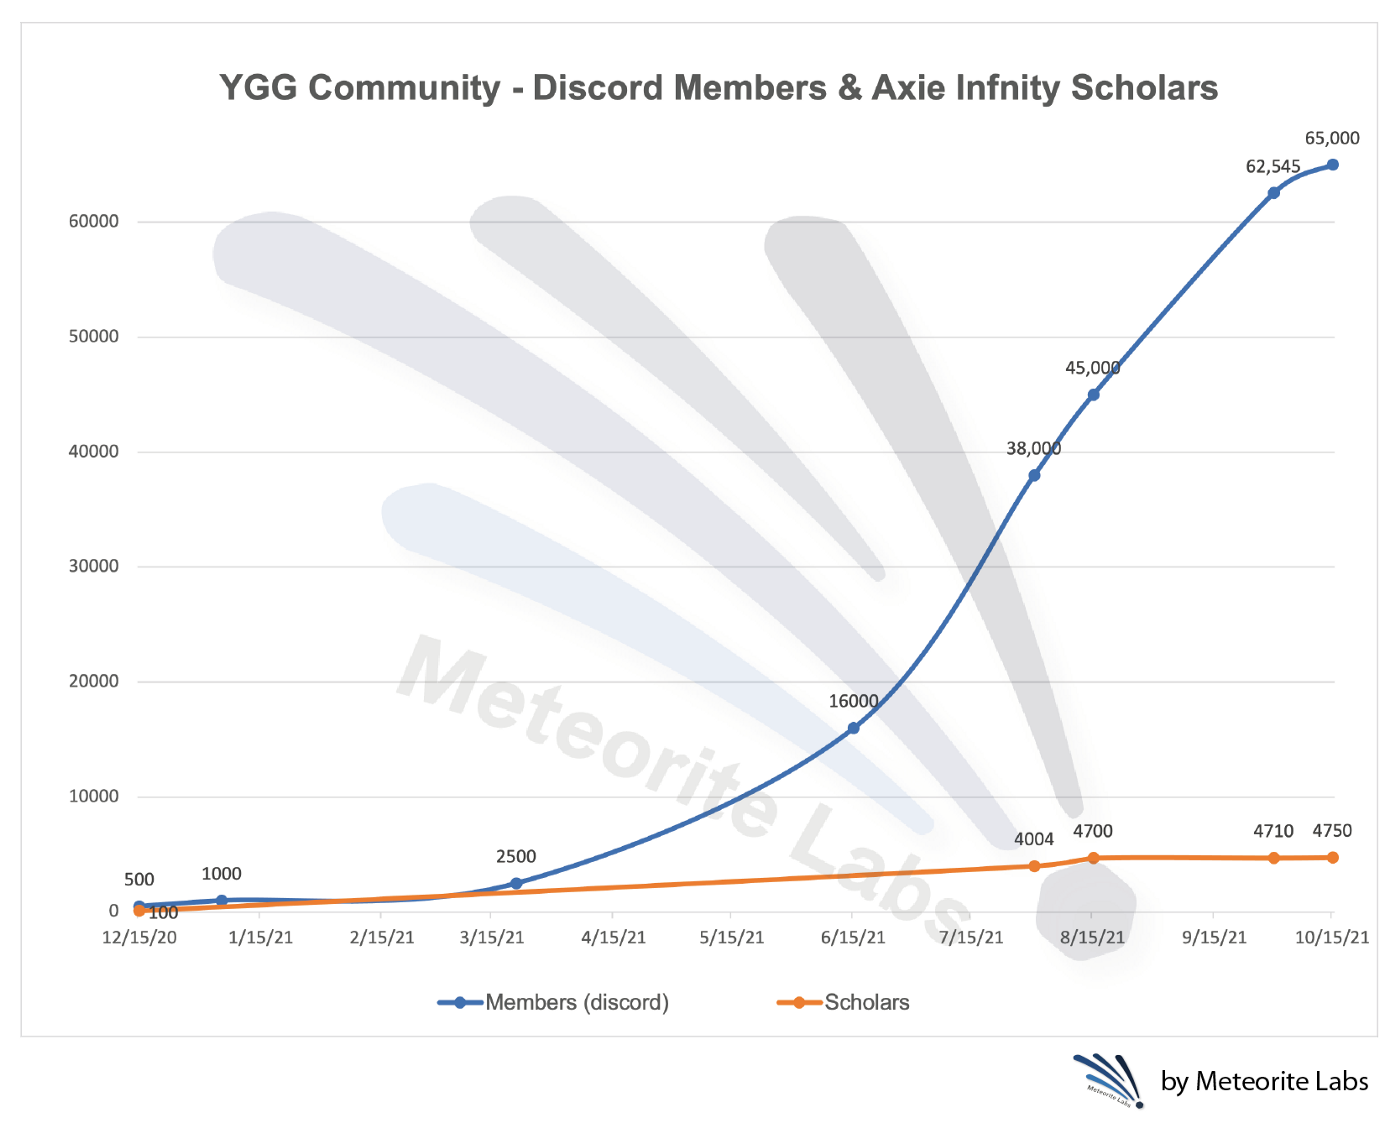 Figure 1. The Growth of Discord Members of YGG (blue line) and The YGG Scholars For Axie Infinity (orange line). It is worth noting that YGG’s discord includes at least five games’ channels and by far, Axie Infinity has the largest volume.